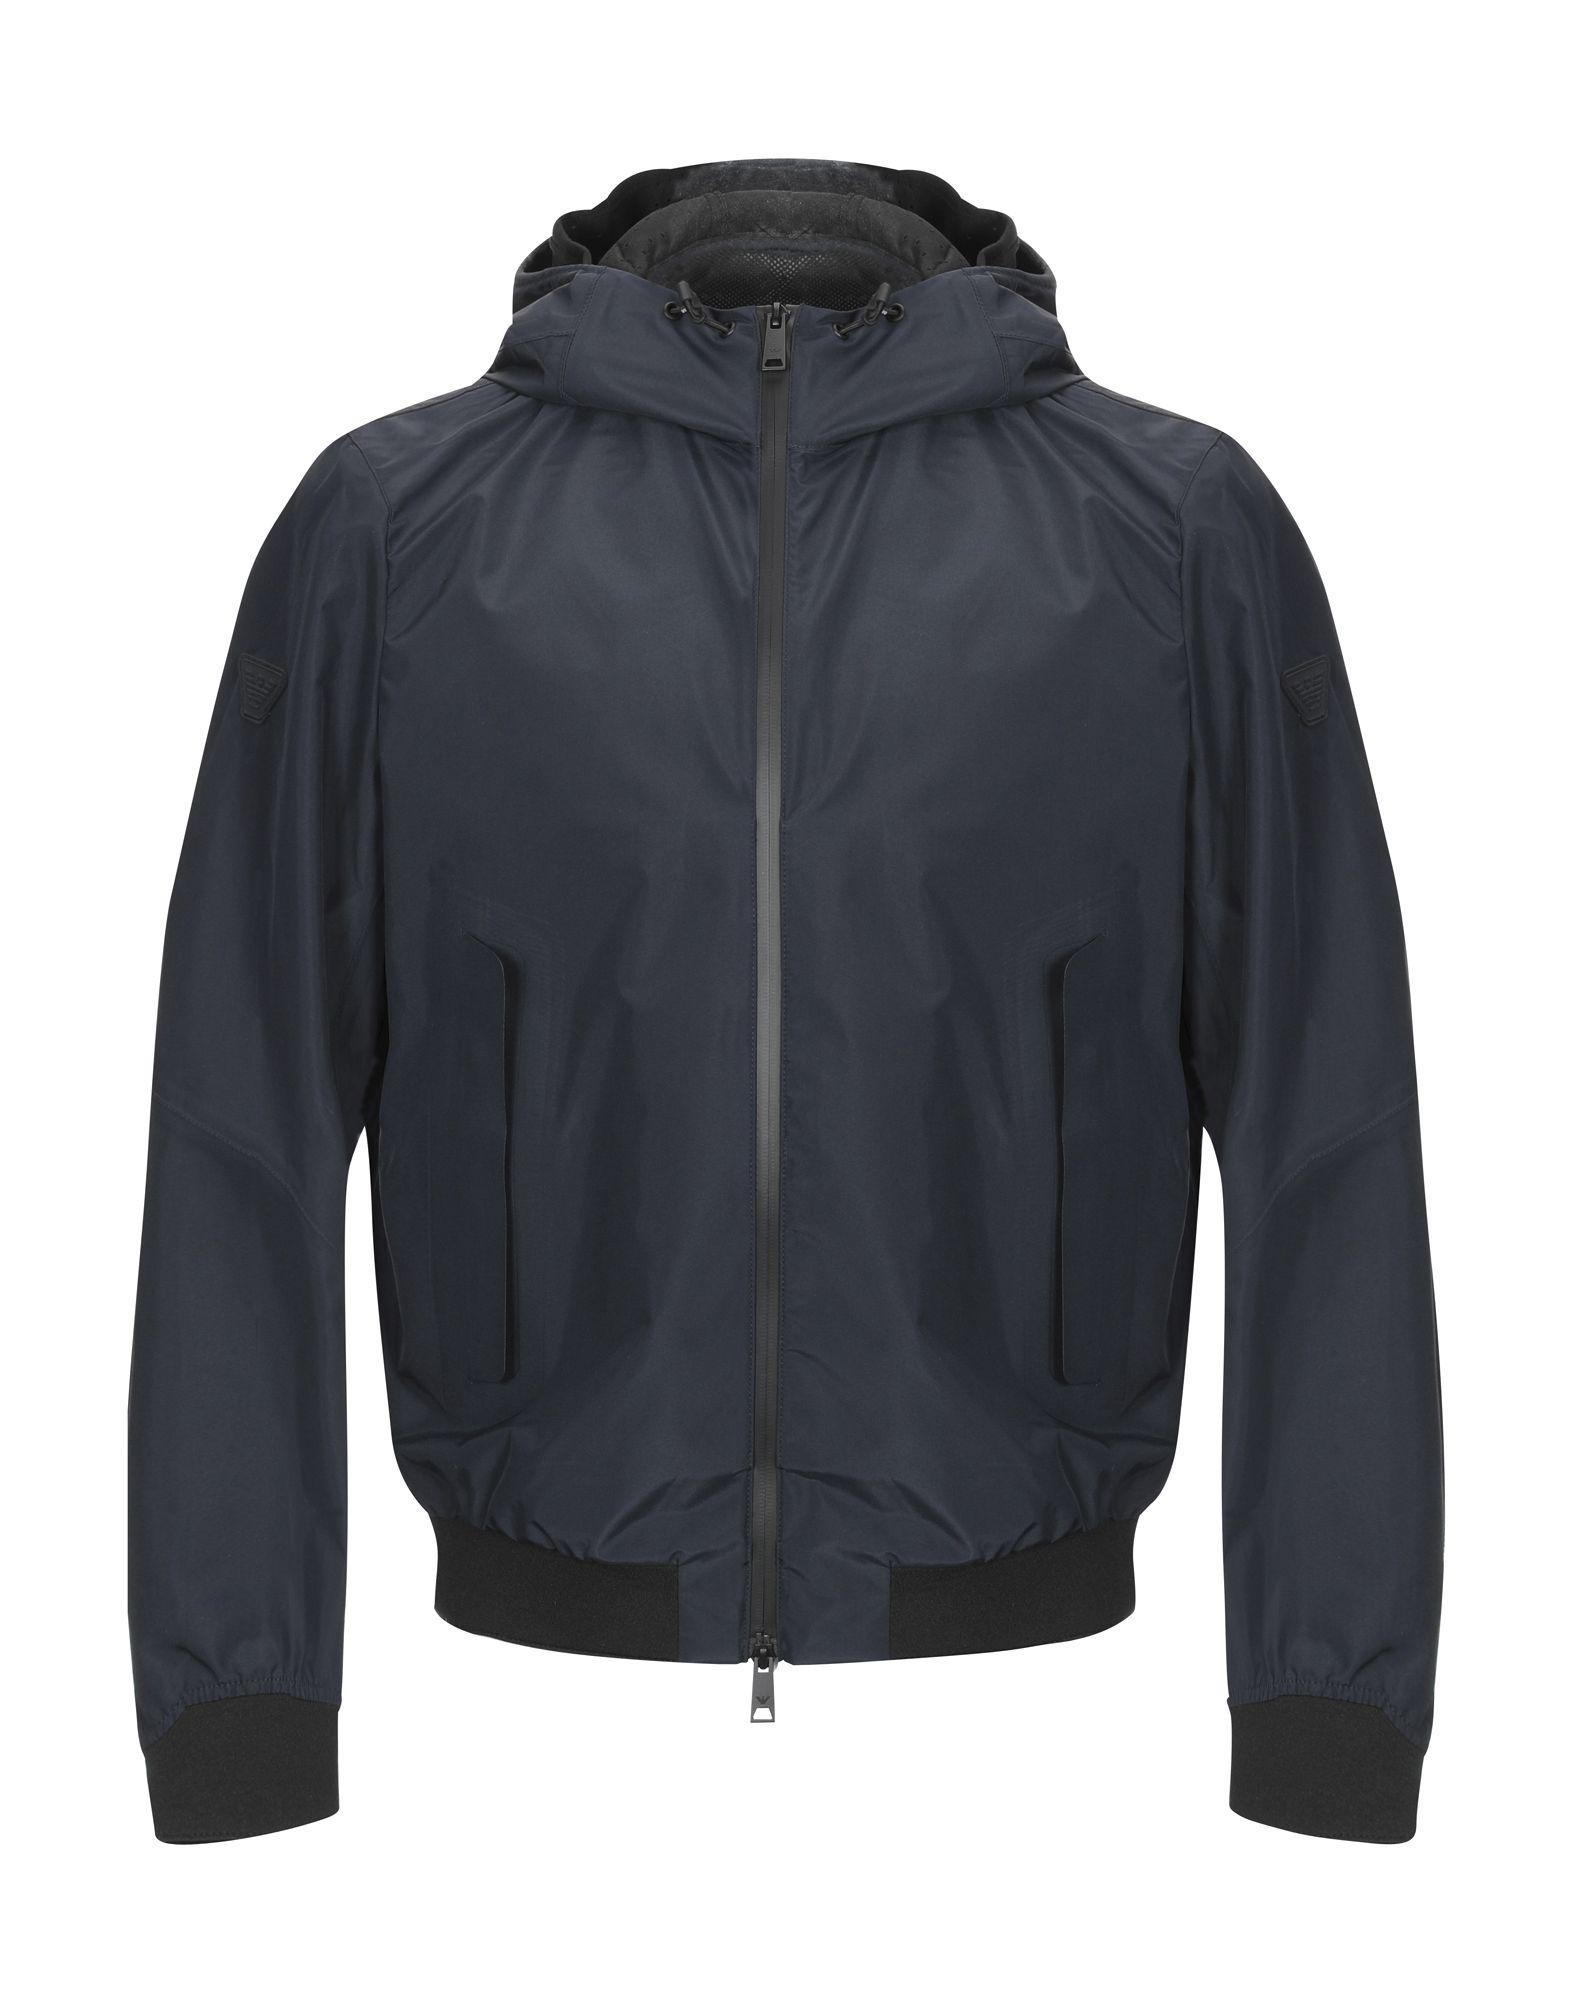 Emporio Armani Jacket in Blue for Men - Lyst